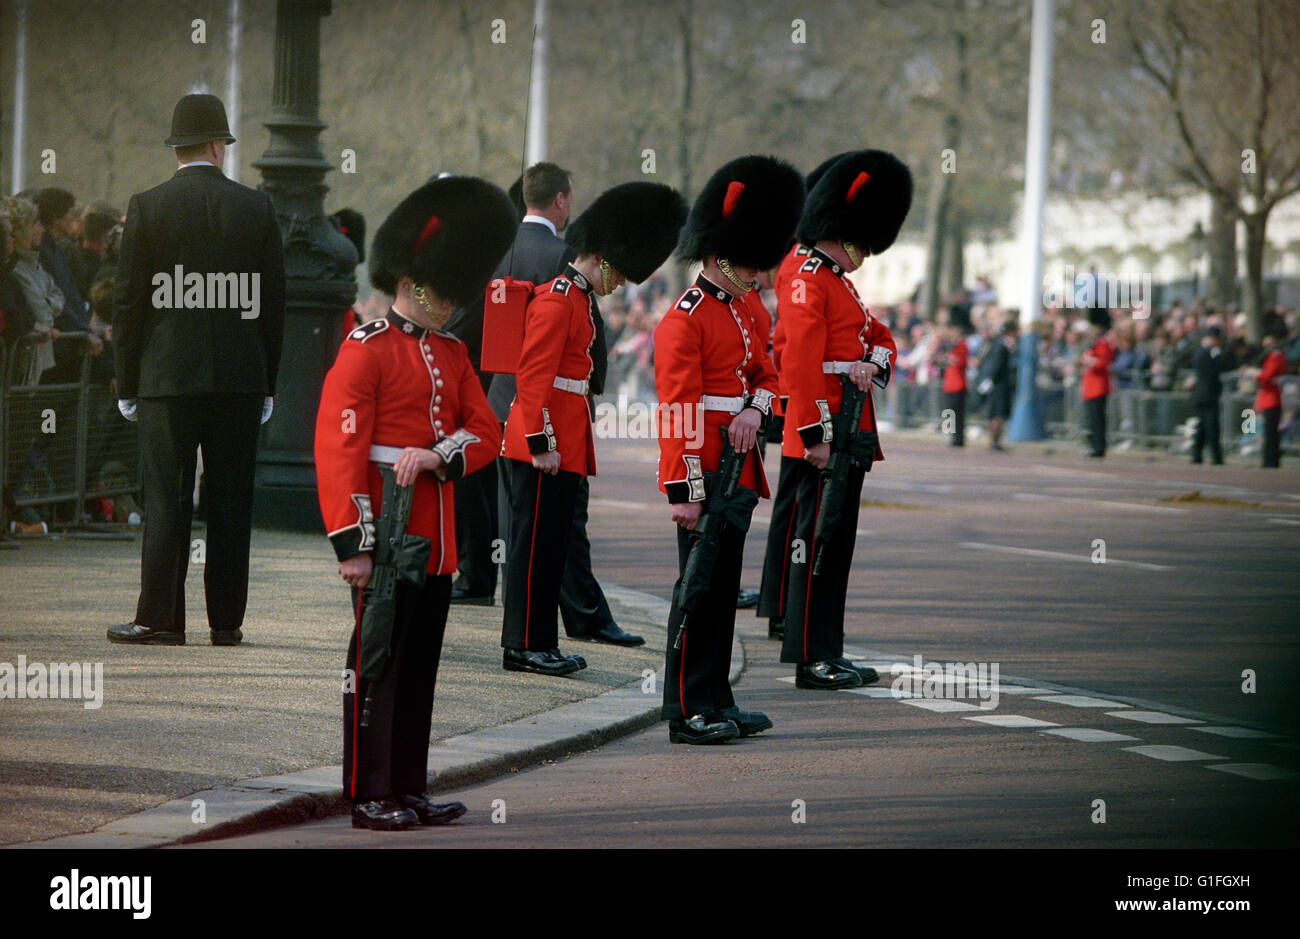 Funeral of HM the Queen Mother who died at 101 years of age of 30 March 2002. The funeral took place on 9 April 2002. Guard of honour lower their heads in respect before the  funeral cortège passed by. NEW scans Stock Photo